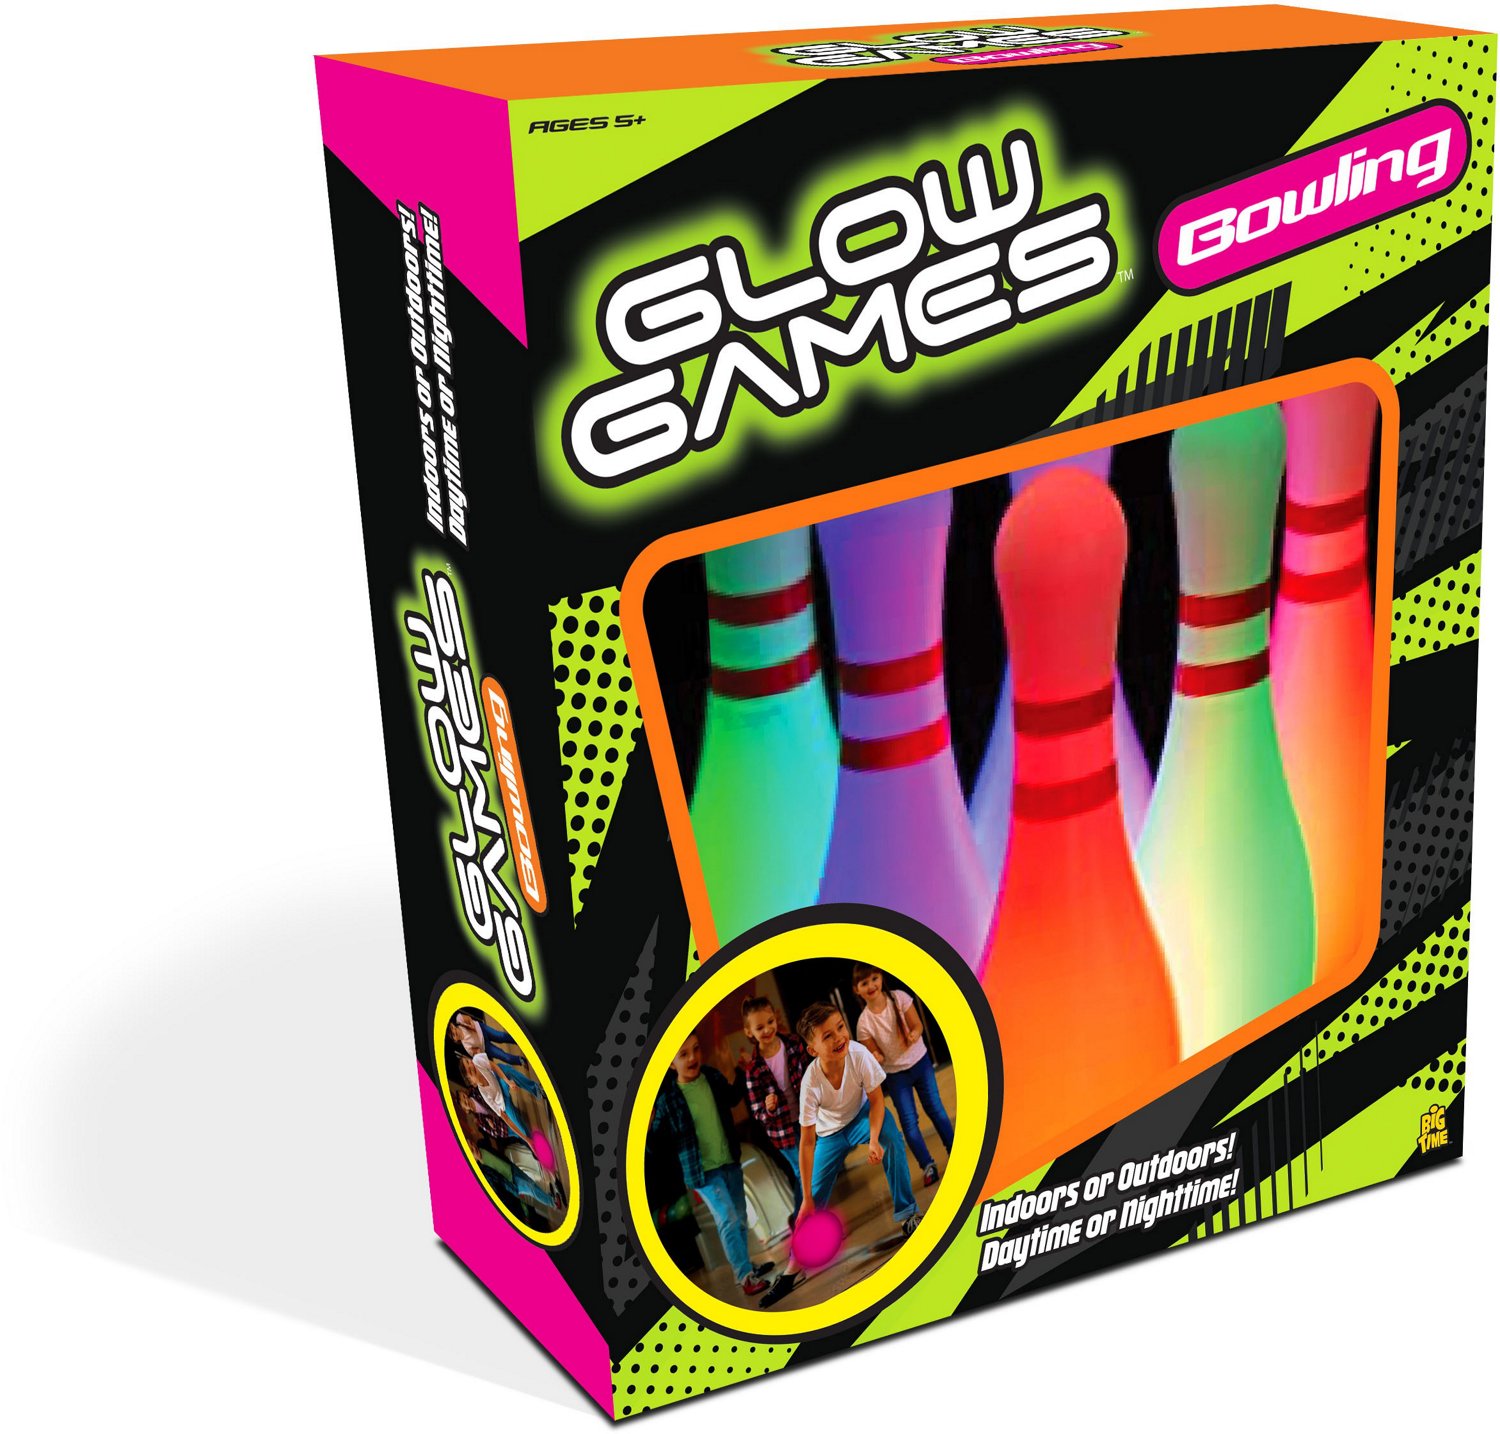 Glow 'n' Bowl: With Lights and Sound! (RP Minis) (Paperback